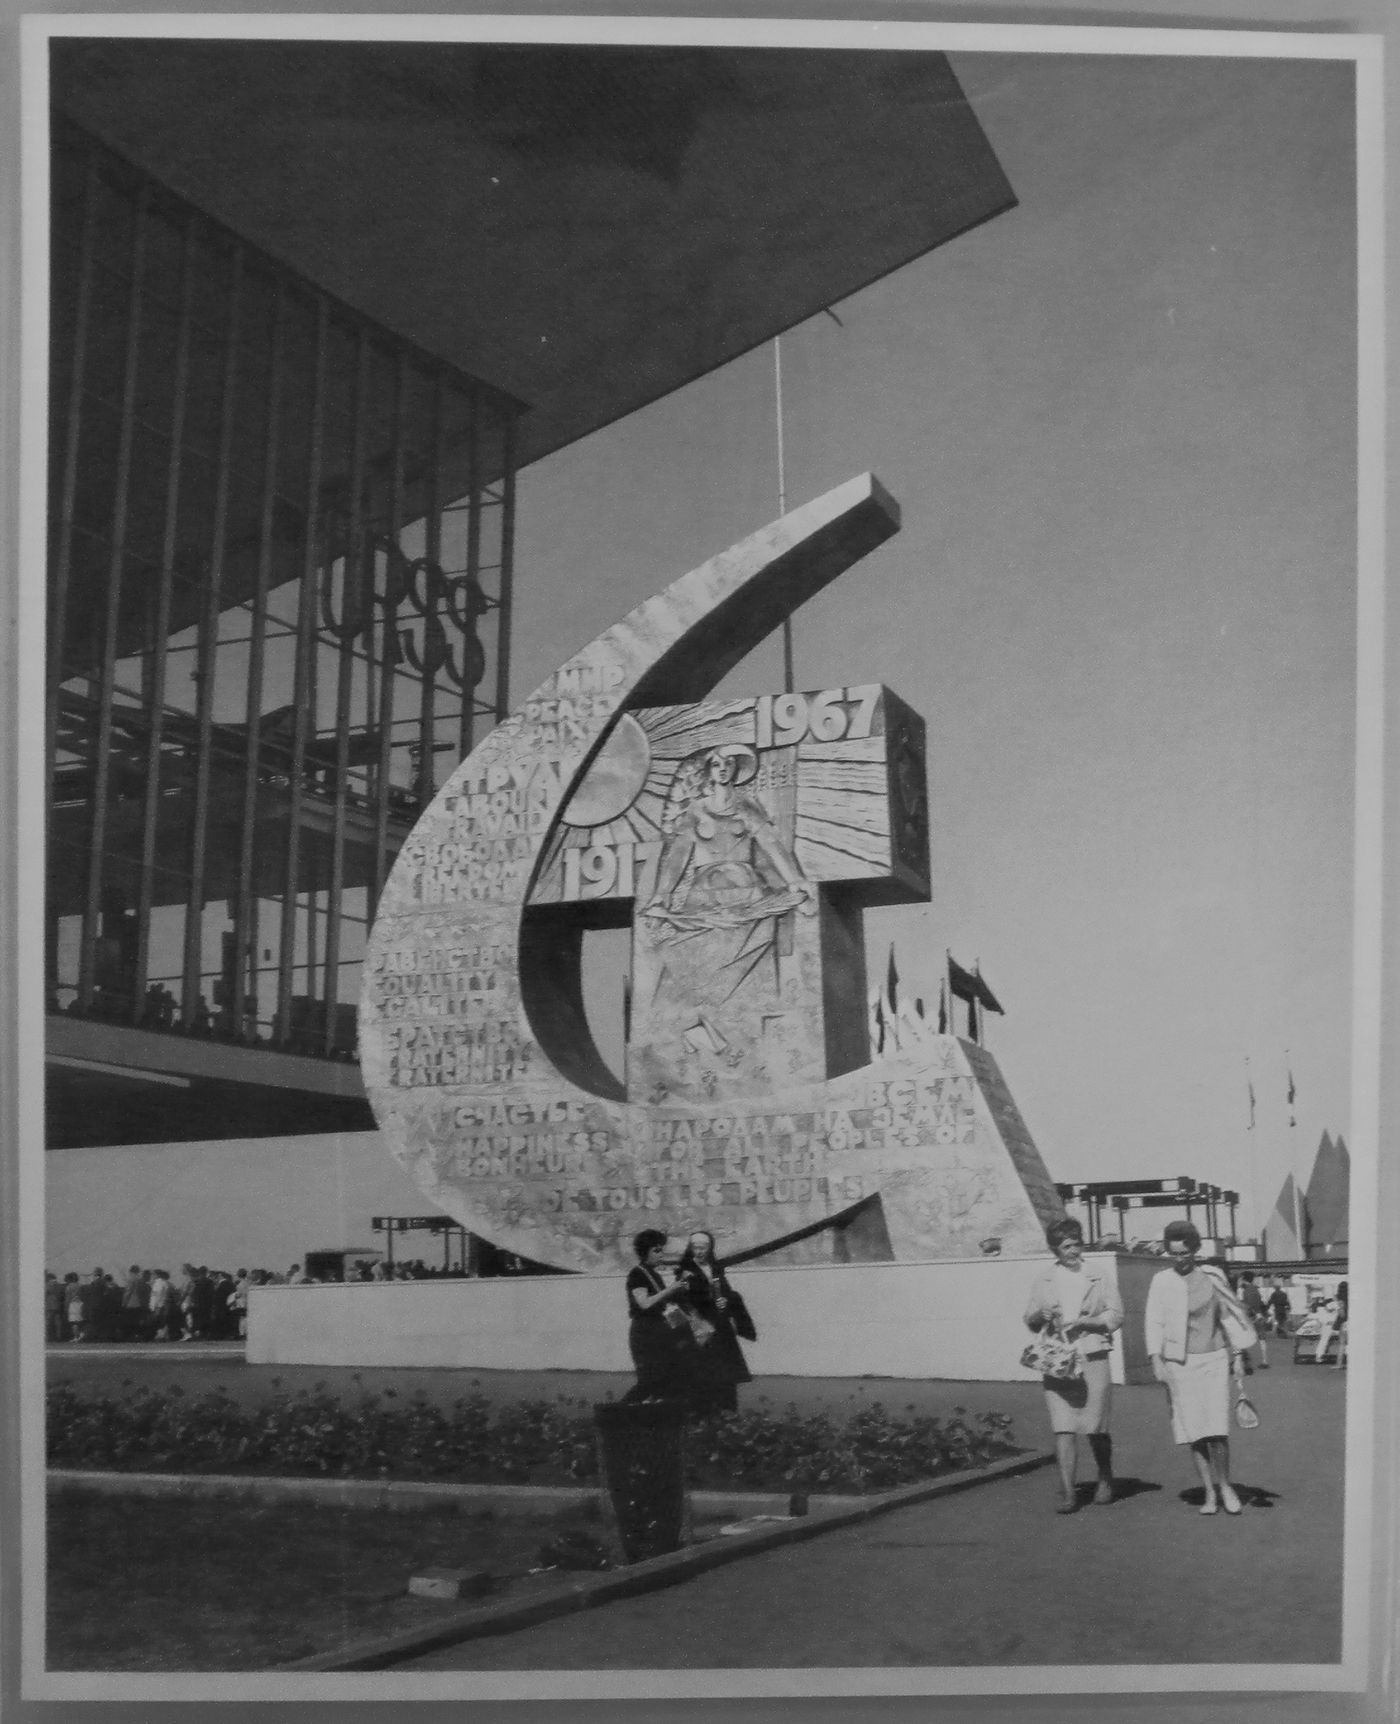 View of the monument representing the symbol of Soviet Union, the hammer and the sickle, at the Pavilion of the Soviet Union, Expo 67, Montréal, Québec